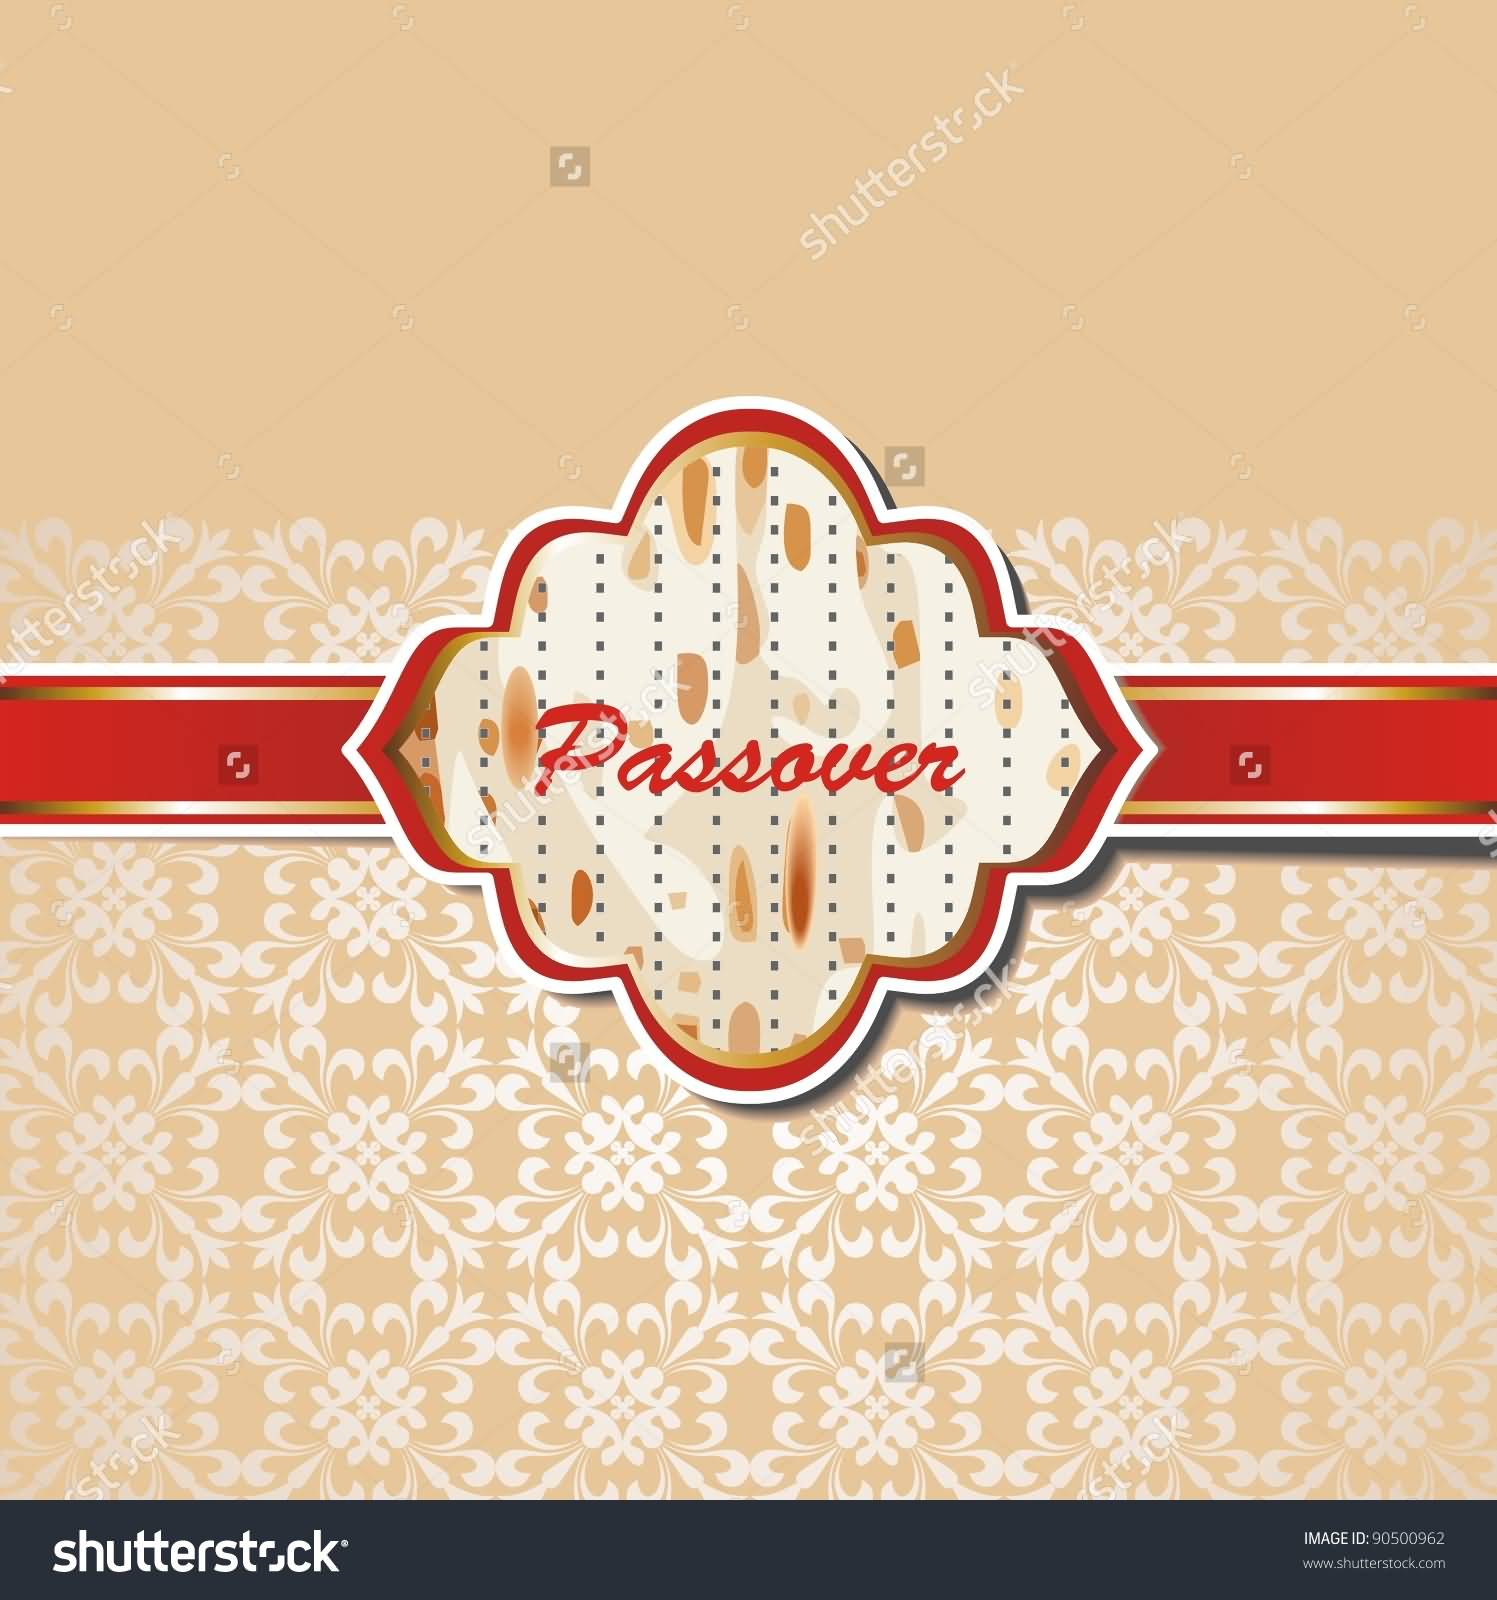 Passover Wishes Card